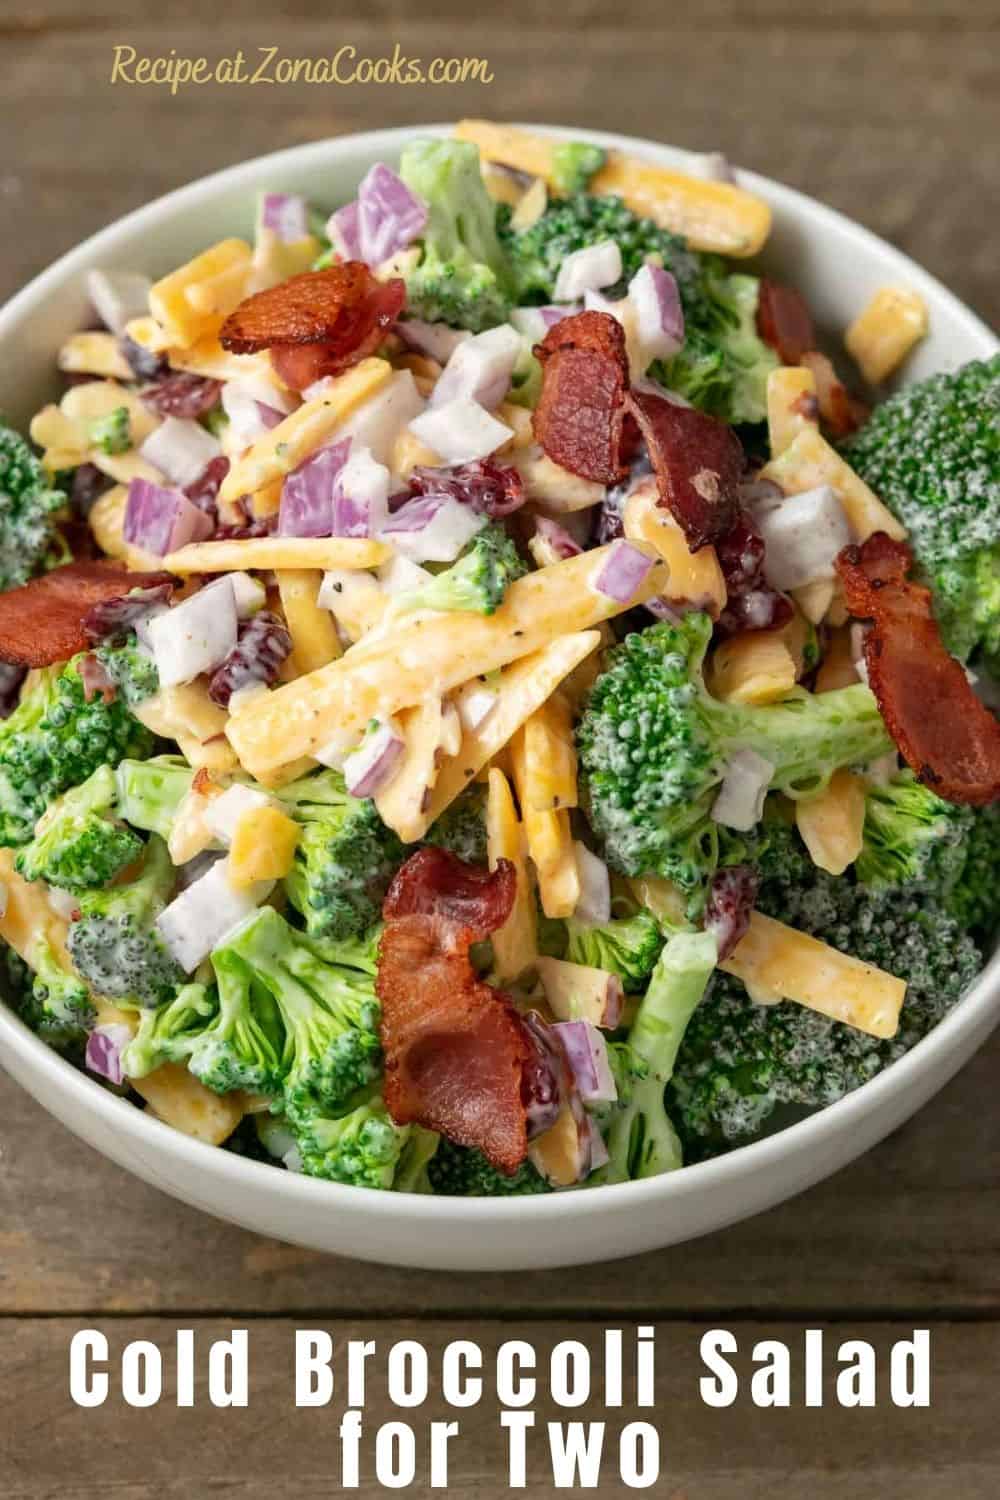 a bowl filled with broccoli, red onion, bacon, cranberries and shredded cheese coated in a white creamy sauce and text reading recipe at zonacooks.com cold broccoli salad for two